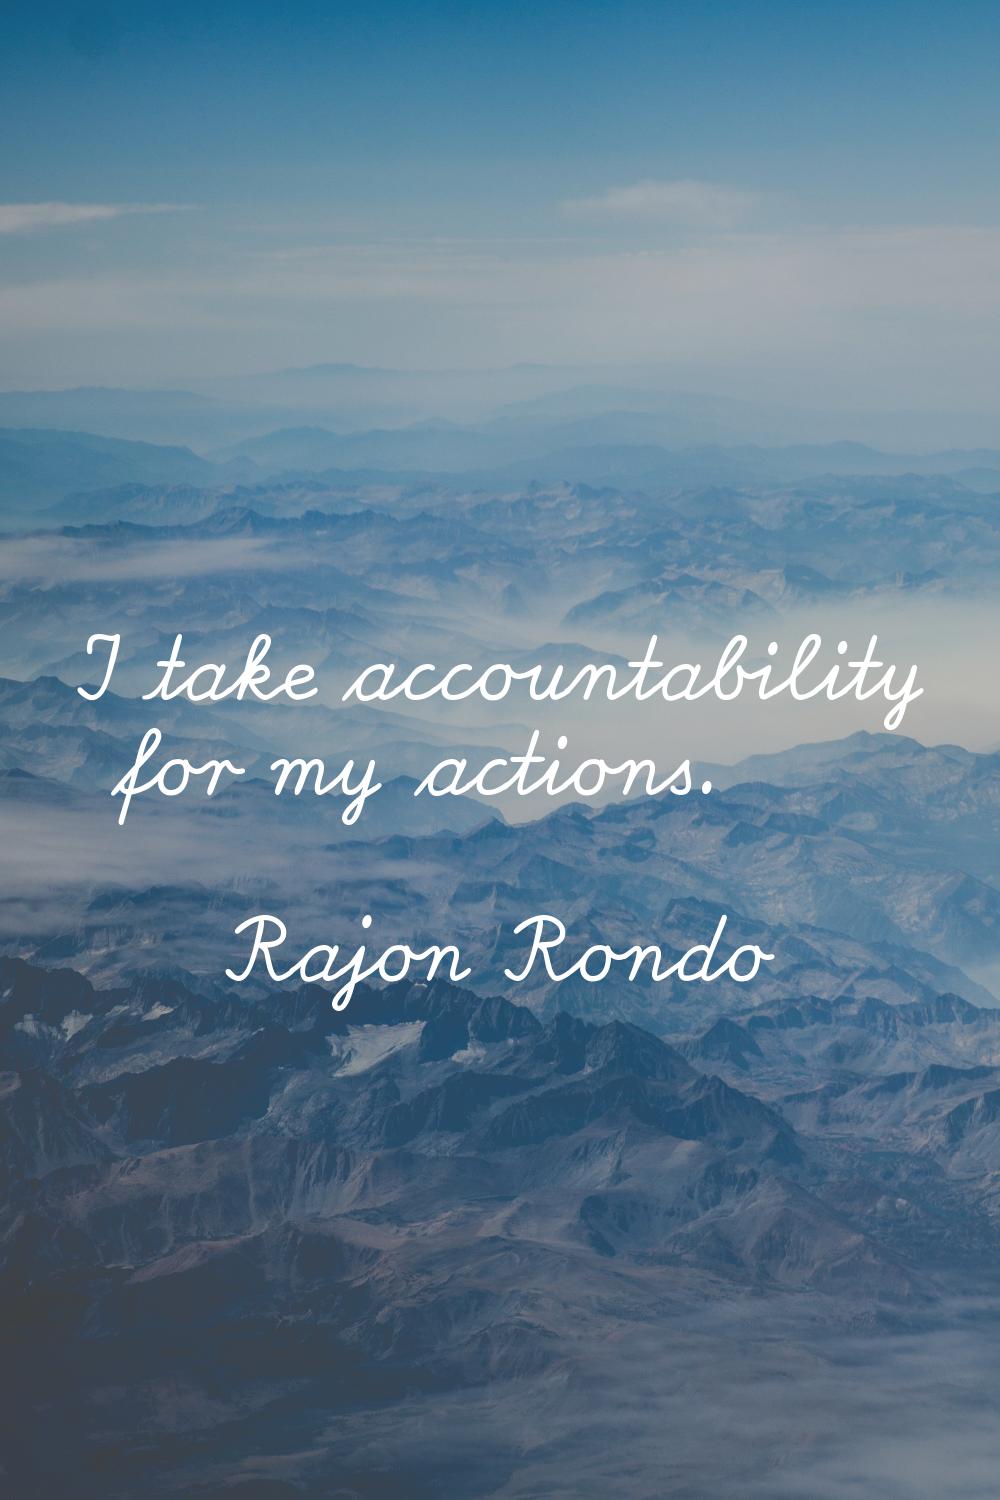 I take accountability for my actions.